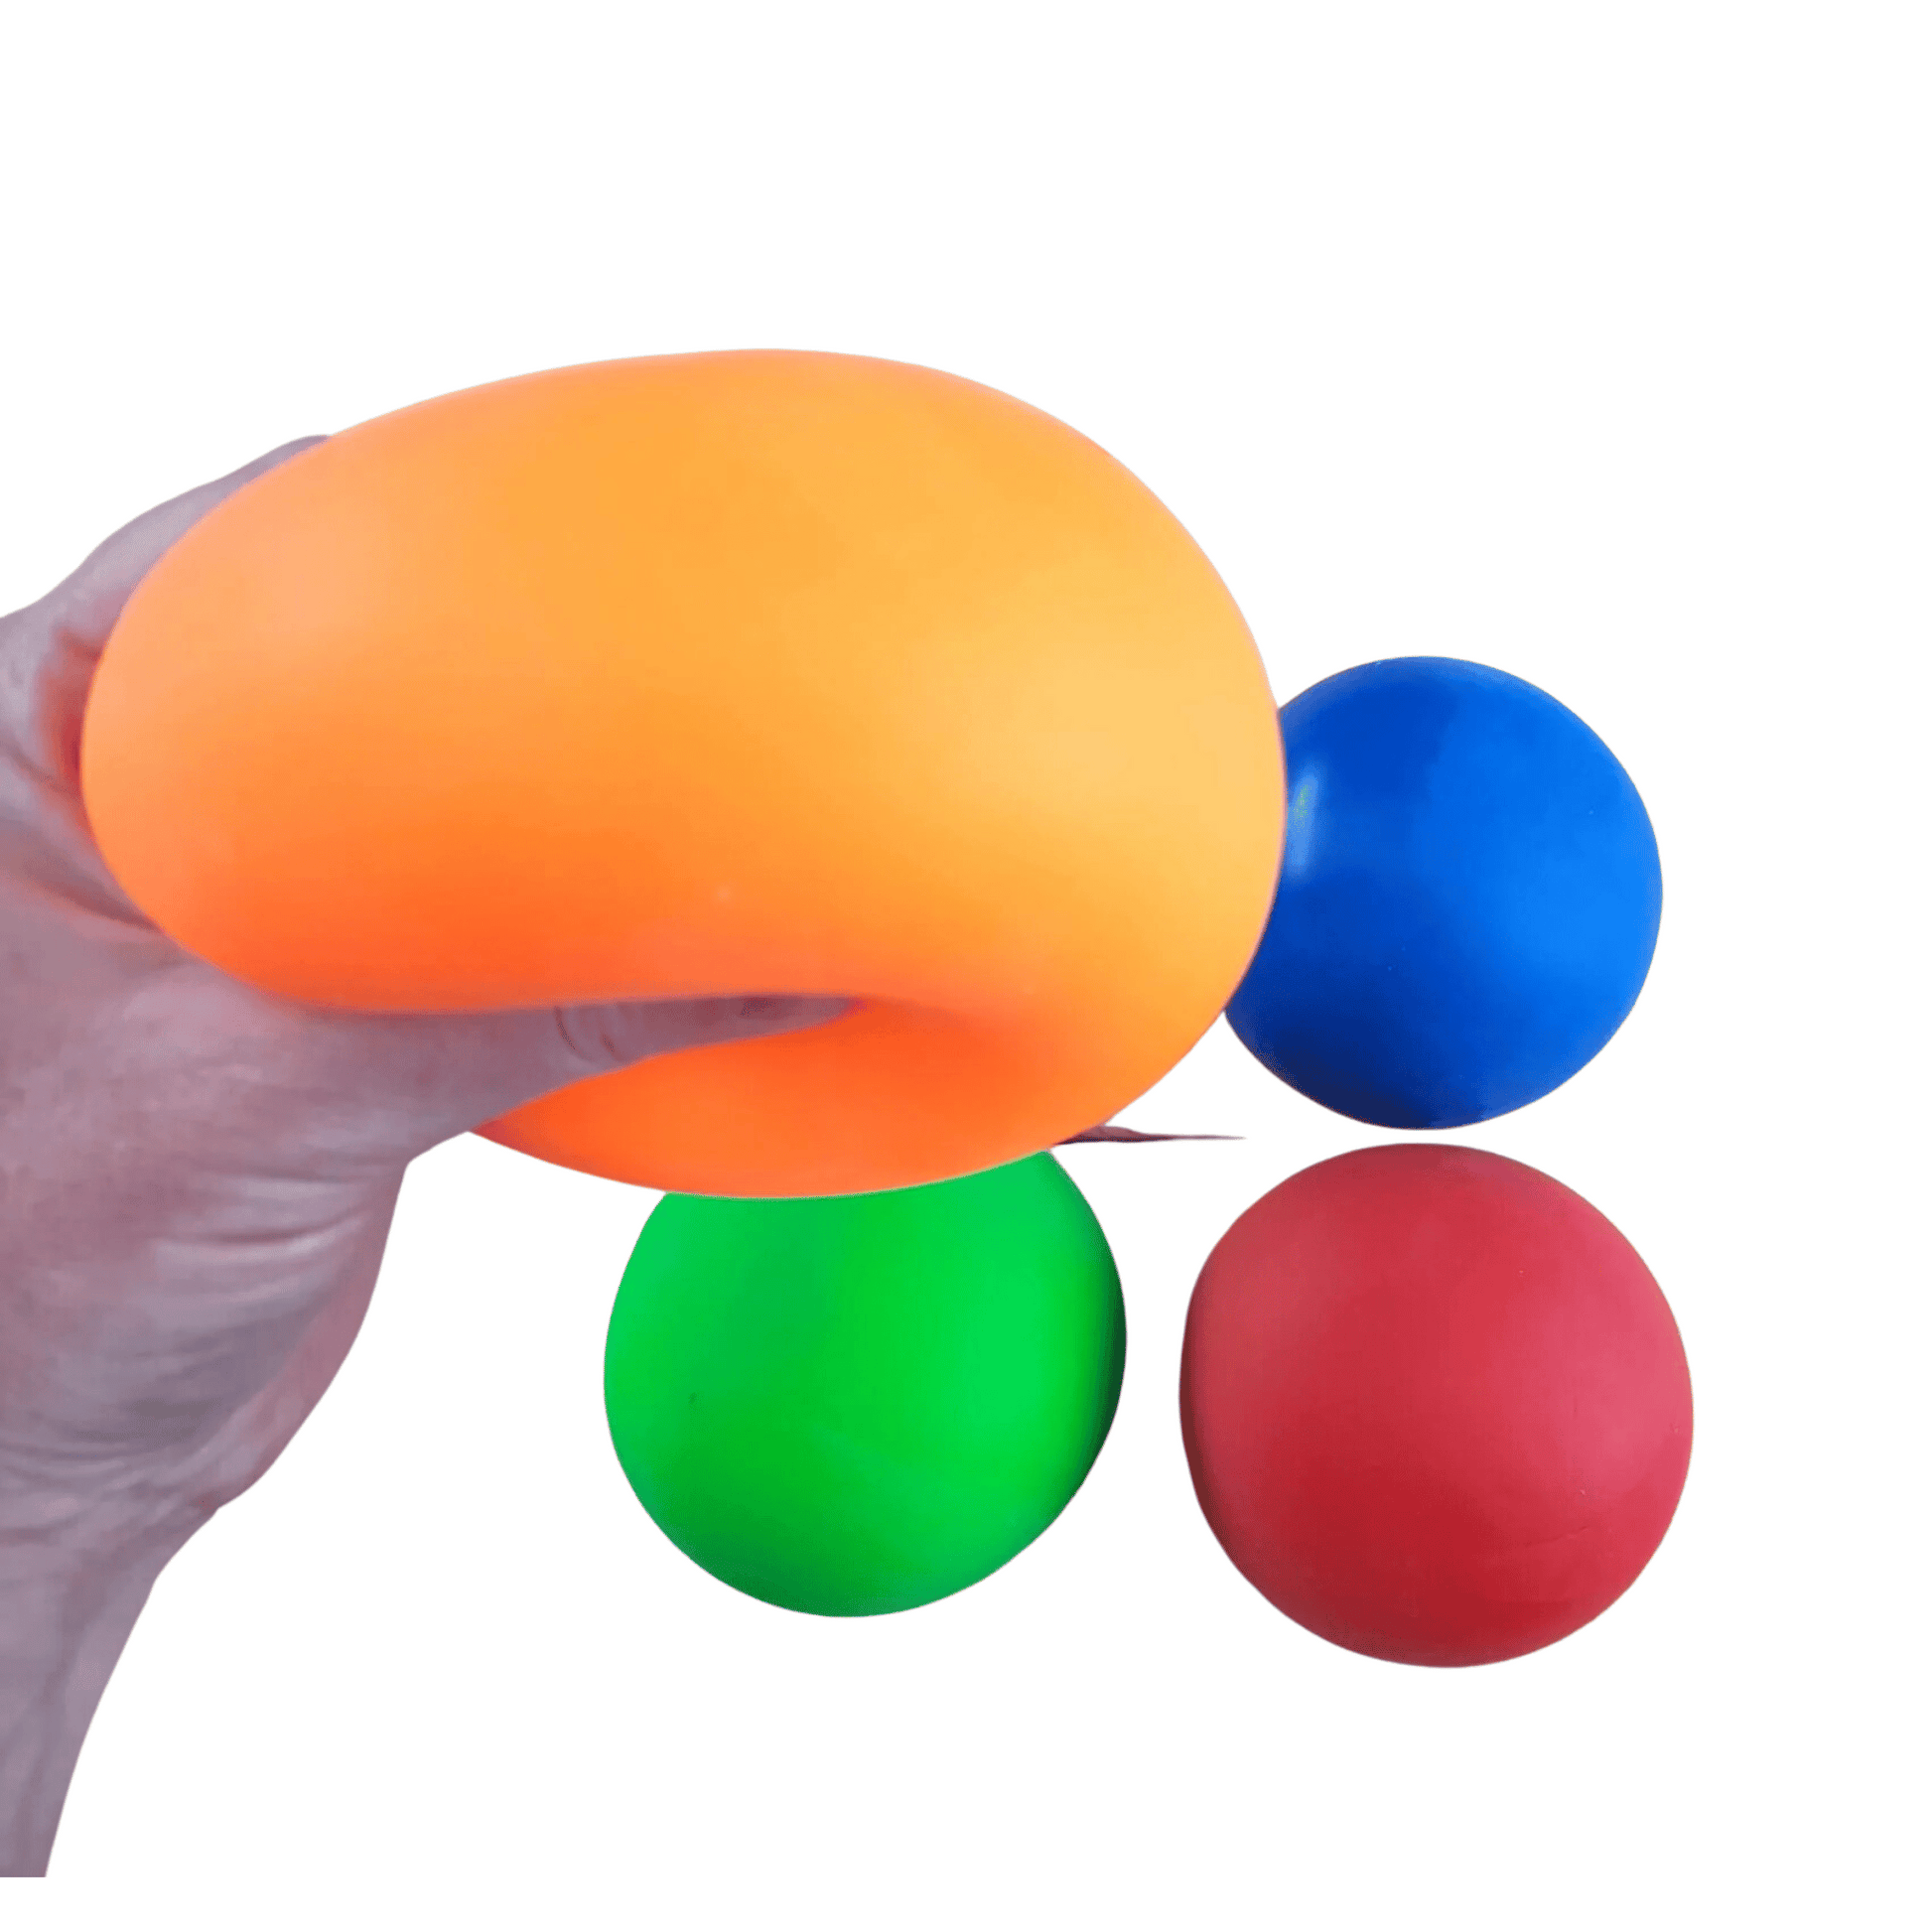 Large Mouldable Clay Stress Ball orange